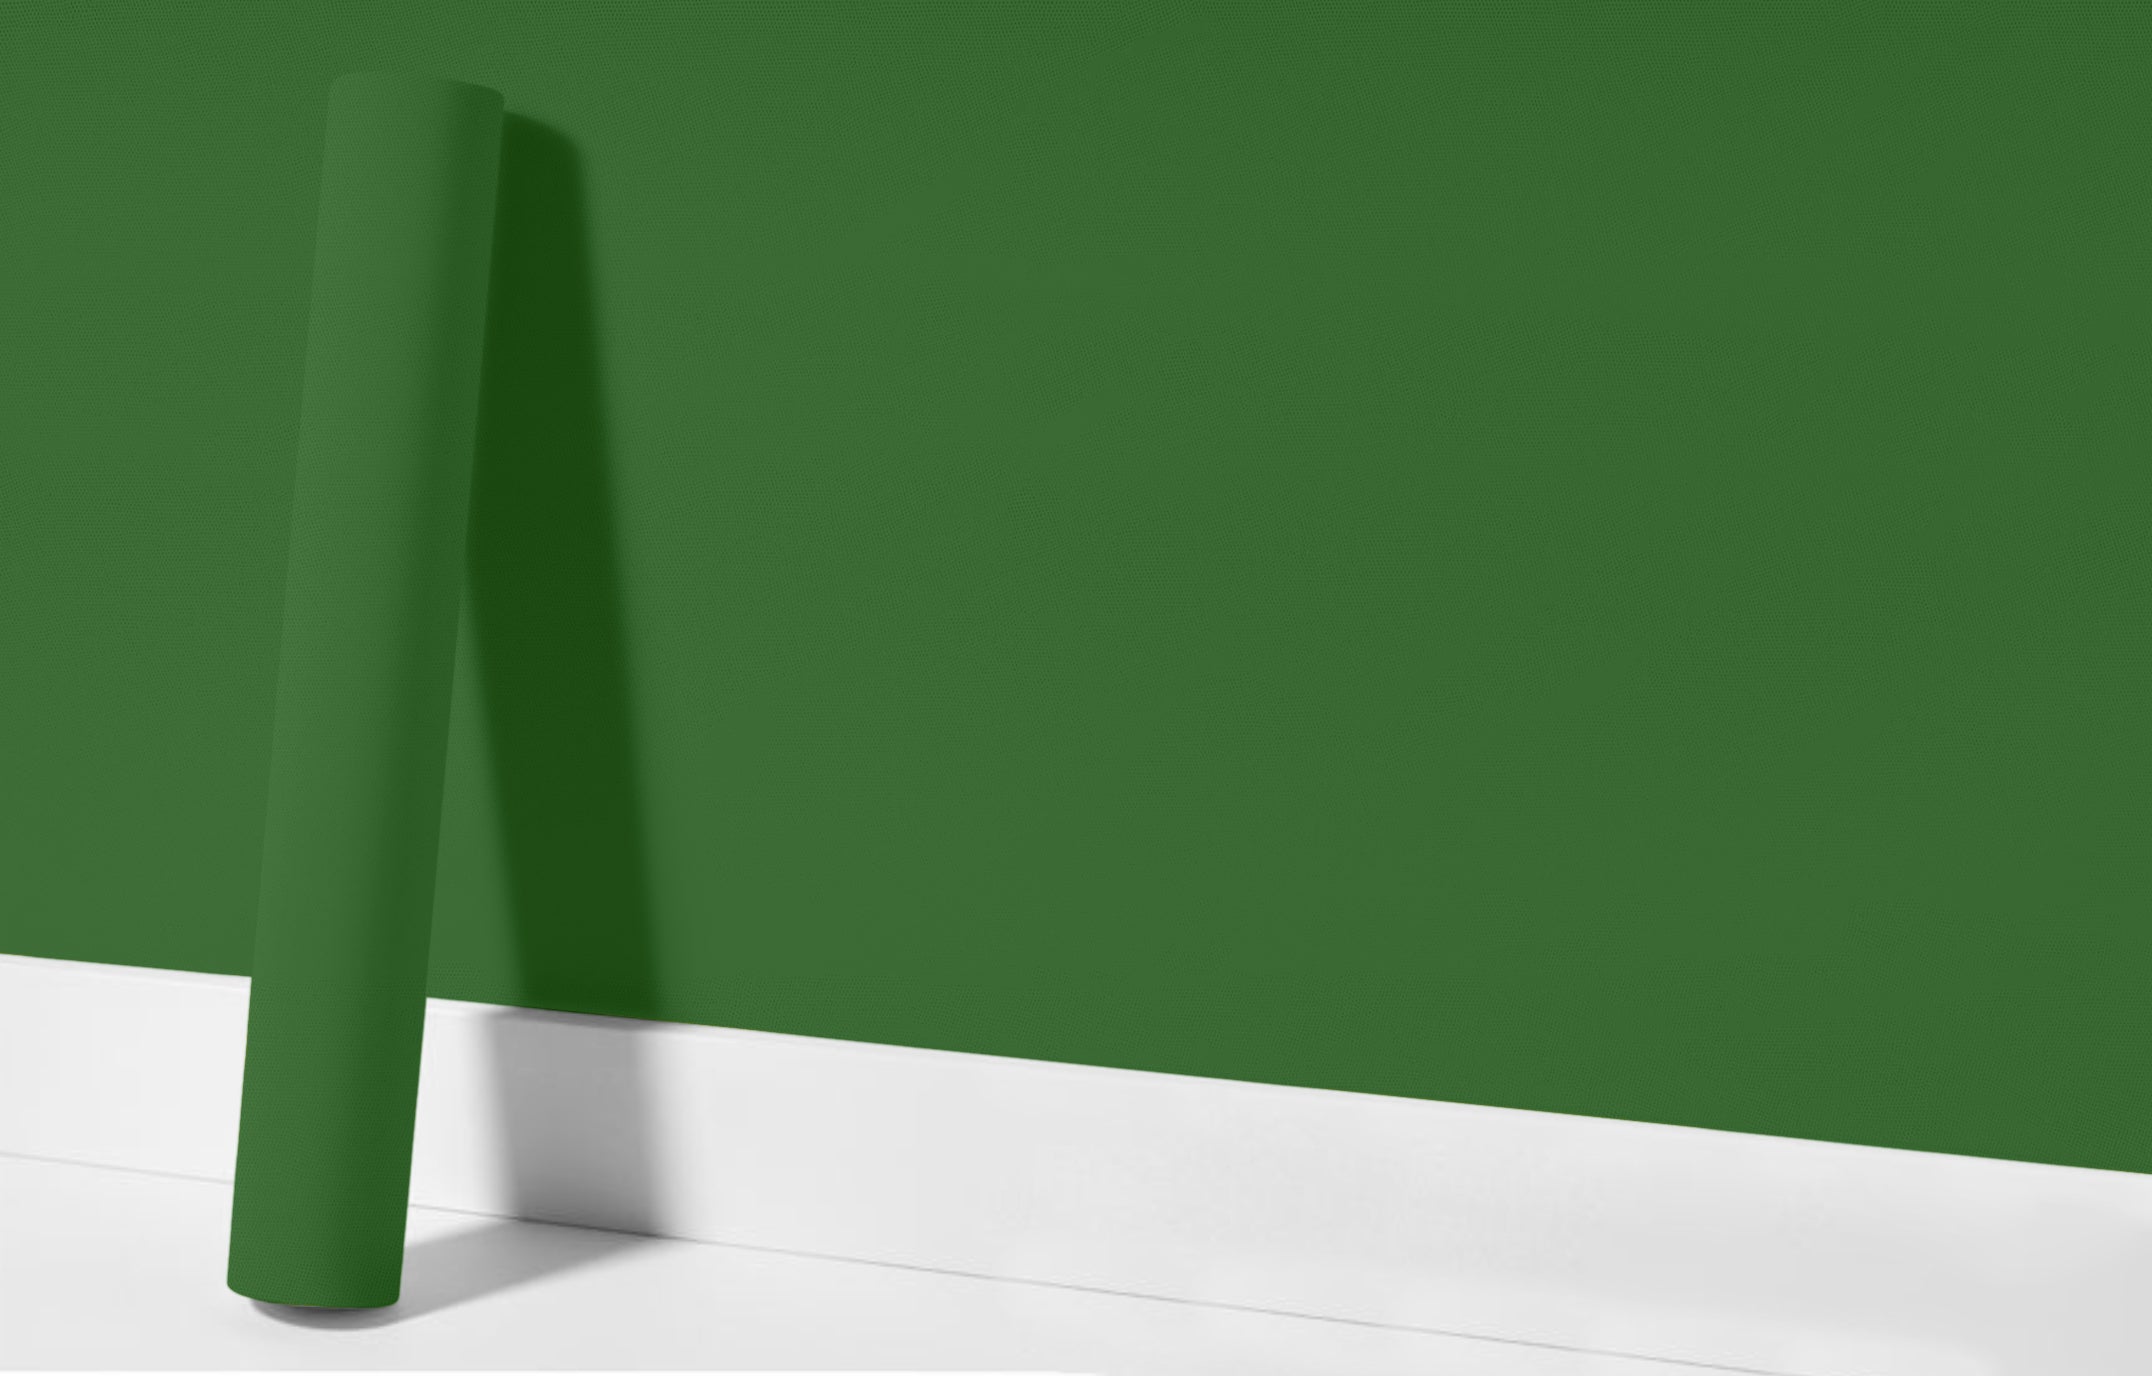 Peel & Stick Removable Re-usable Paint - Color RAL 6001 Emerald Green - offRAL™ - RALRAW LLC, USA